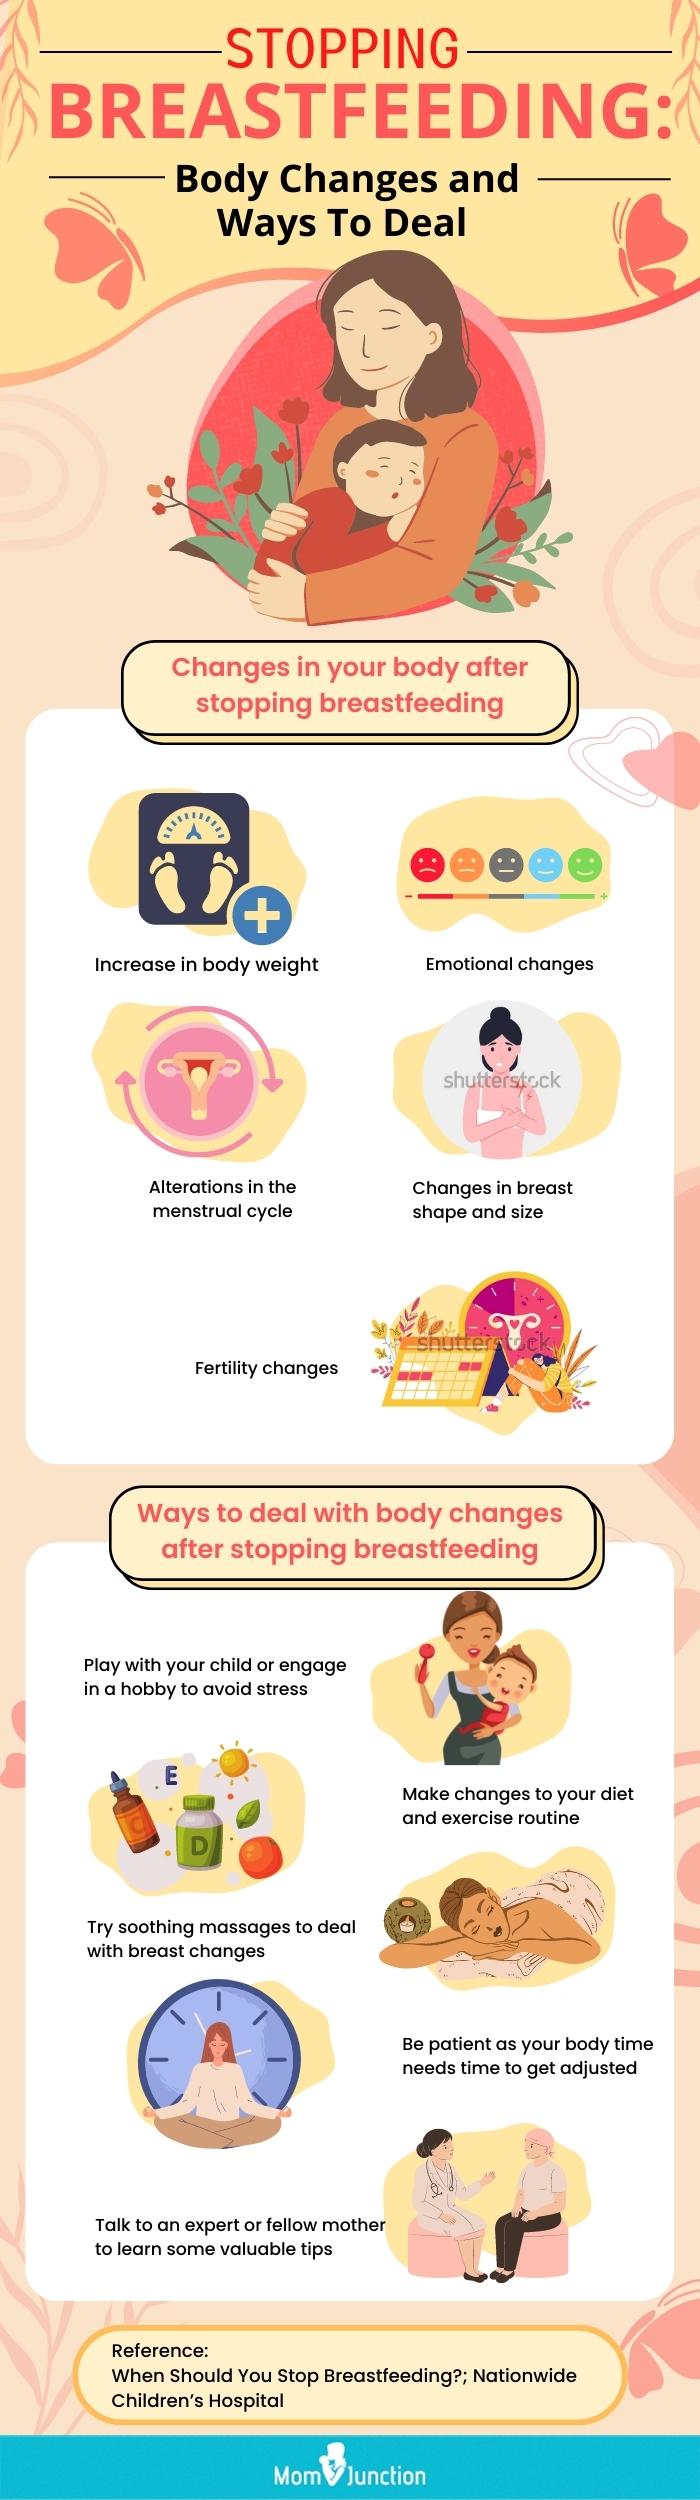 4 Tips To Avoid Weight Gain After Stopping Breastfeeding